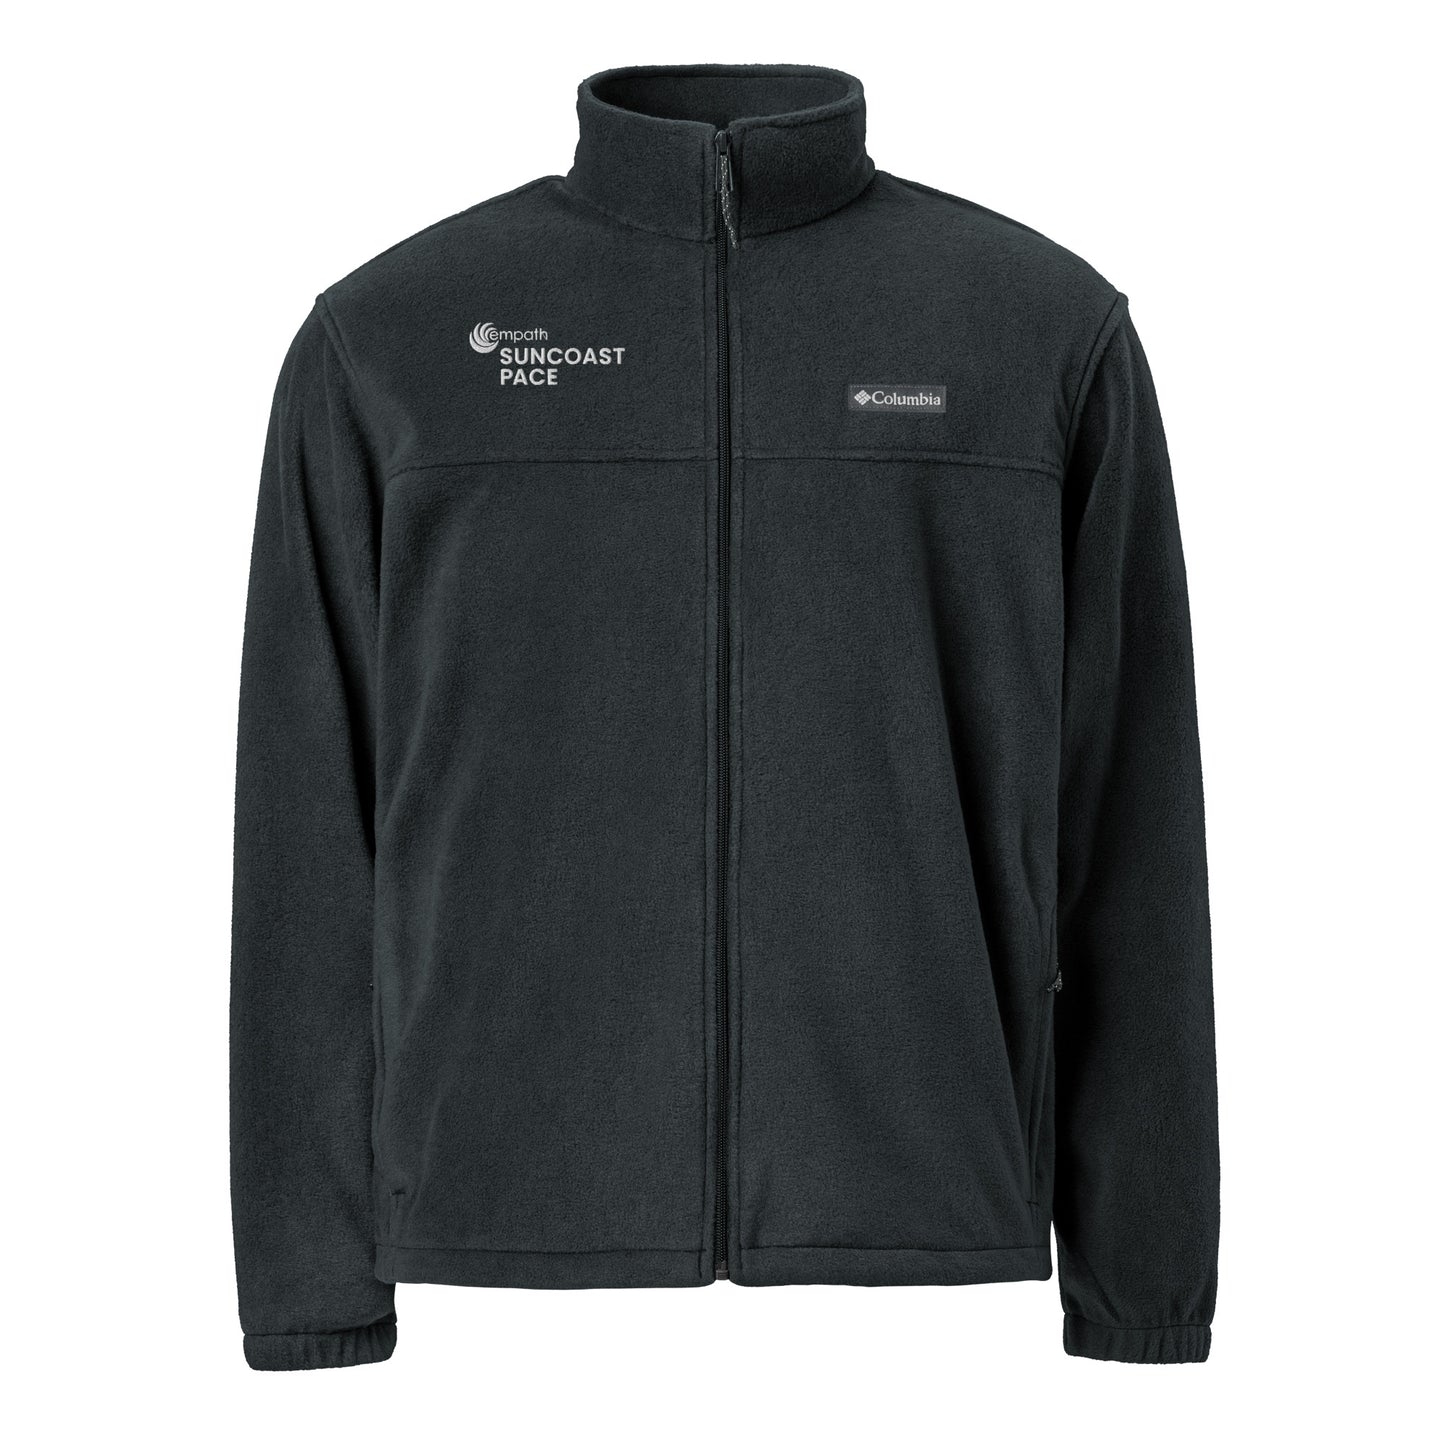 Columbia | Unisex fleece jacket (relaxed fit) - Suncoast PACE